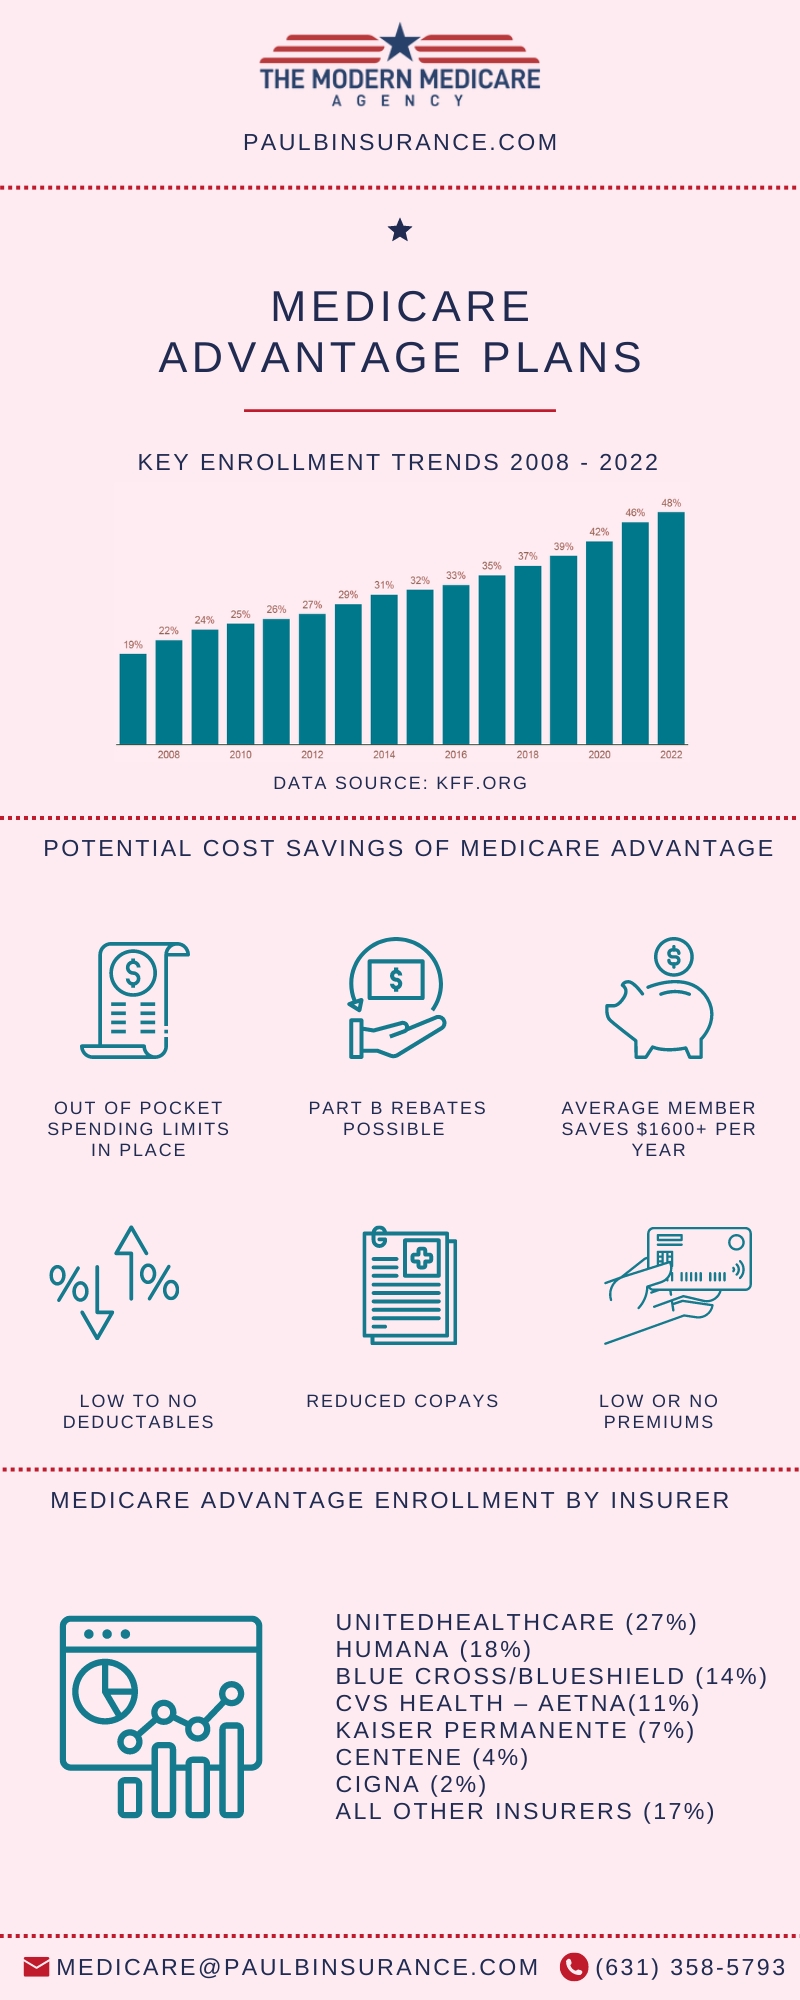 This medicare infographic was produced by paulbinsurance.com